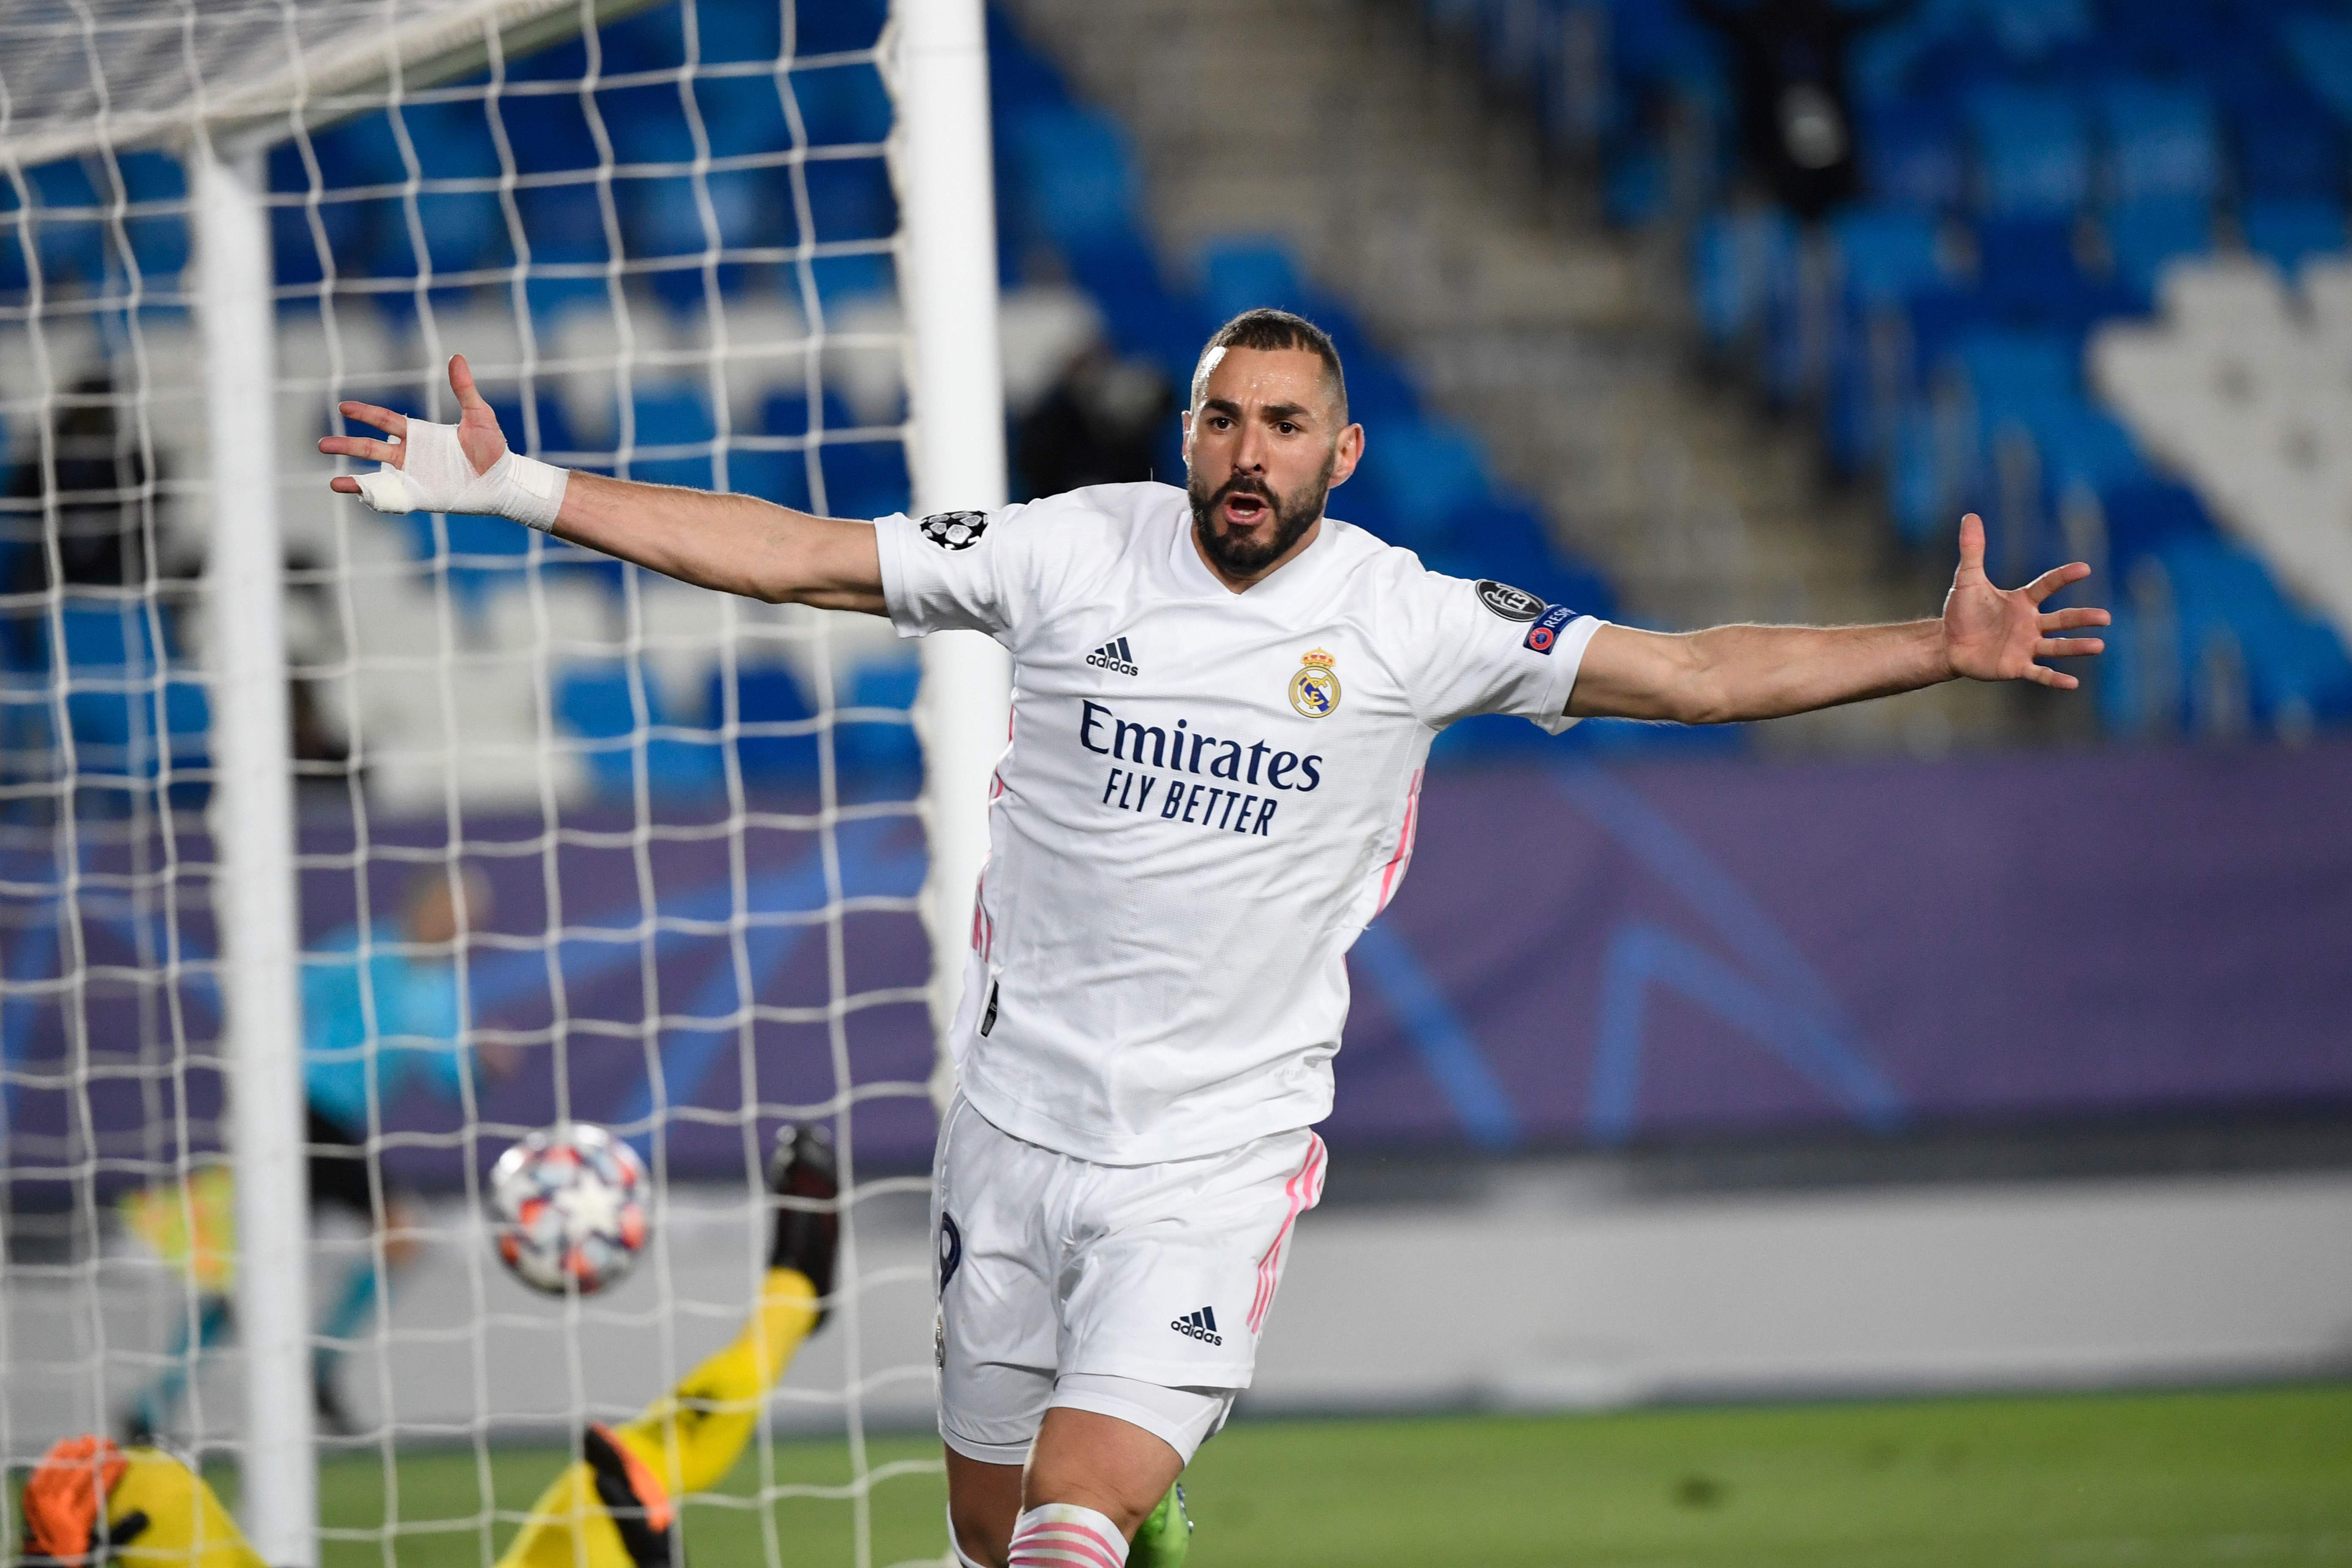 Real Madrid's French forward Karim Benzema celebrates after scoring his second goal during the UEFA Champions League group B football match between Real Madrid and Borussia Moenchengladbach at the Alfredo Di Stefano stadium in Valdebebas, northeast of Madrid, on December 9, 2020. (Photo by PIERRE-PHILIPPE MARCOU / AFP)